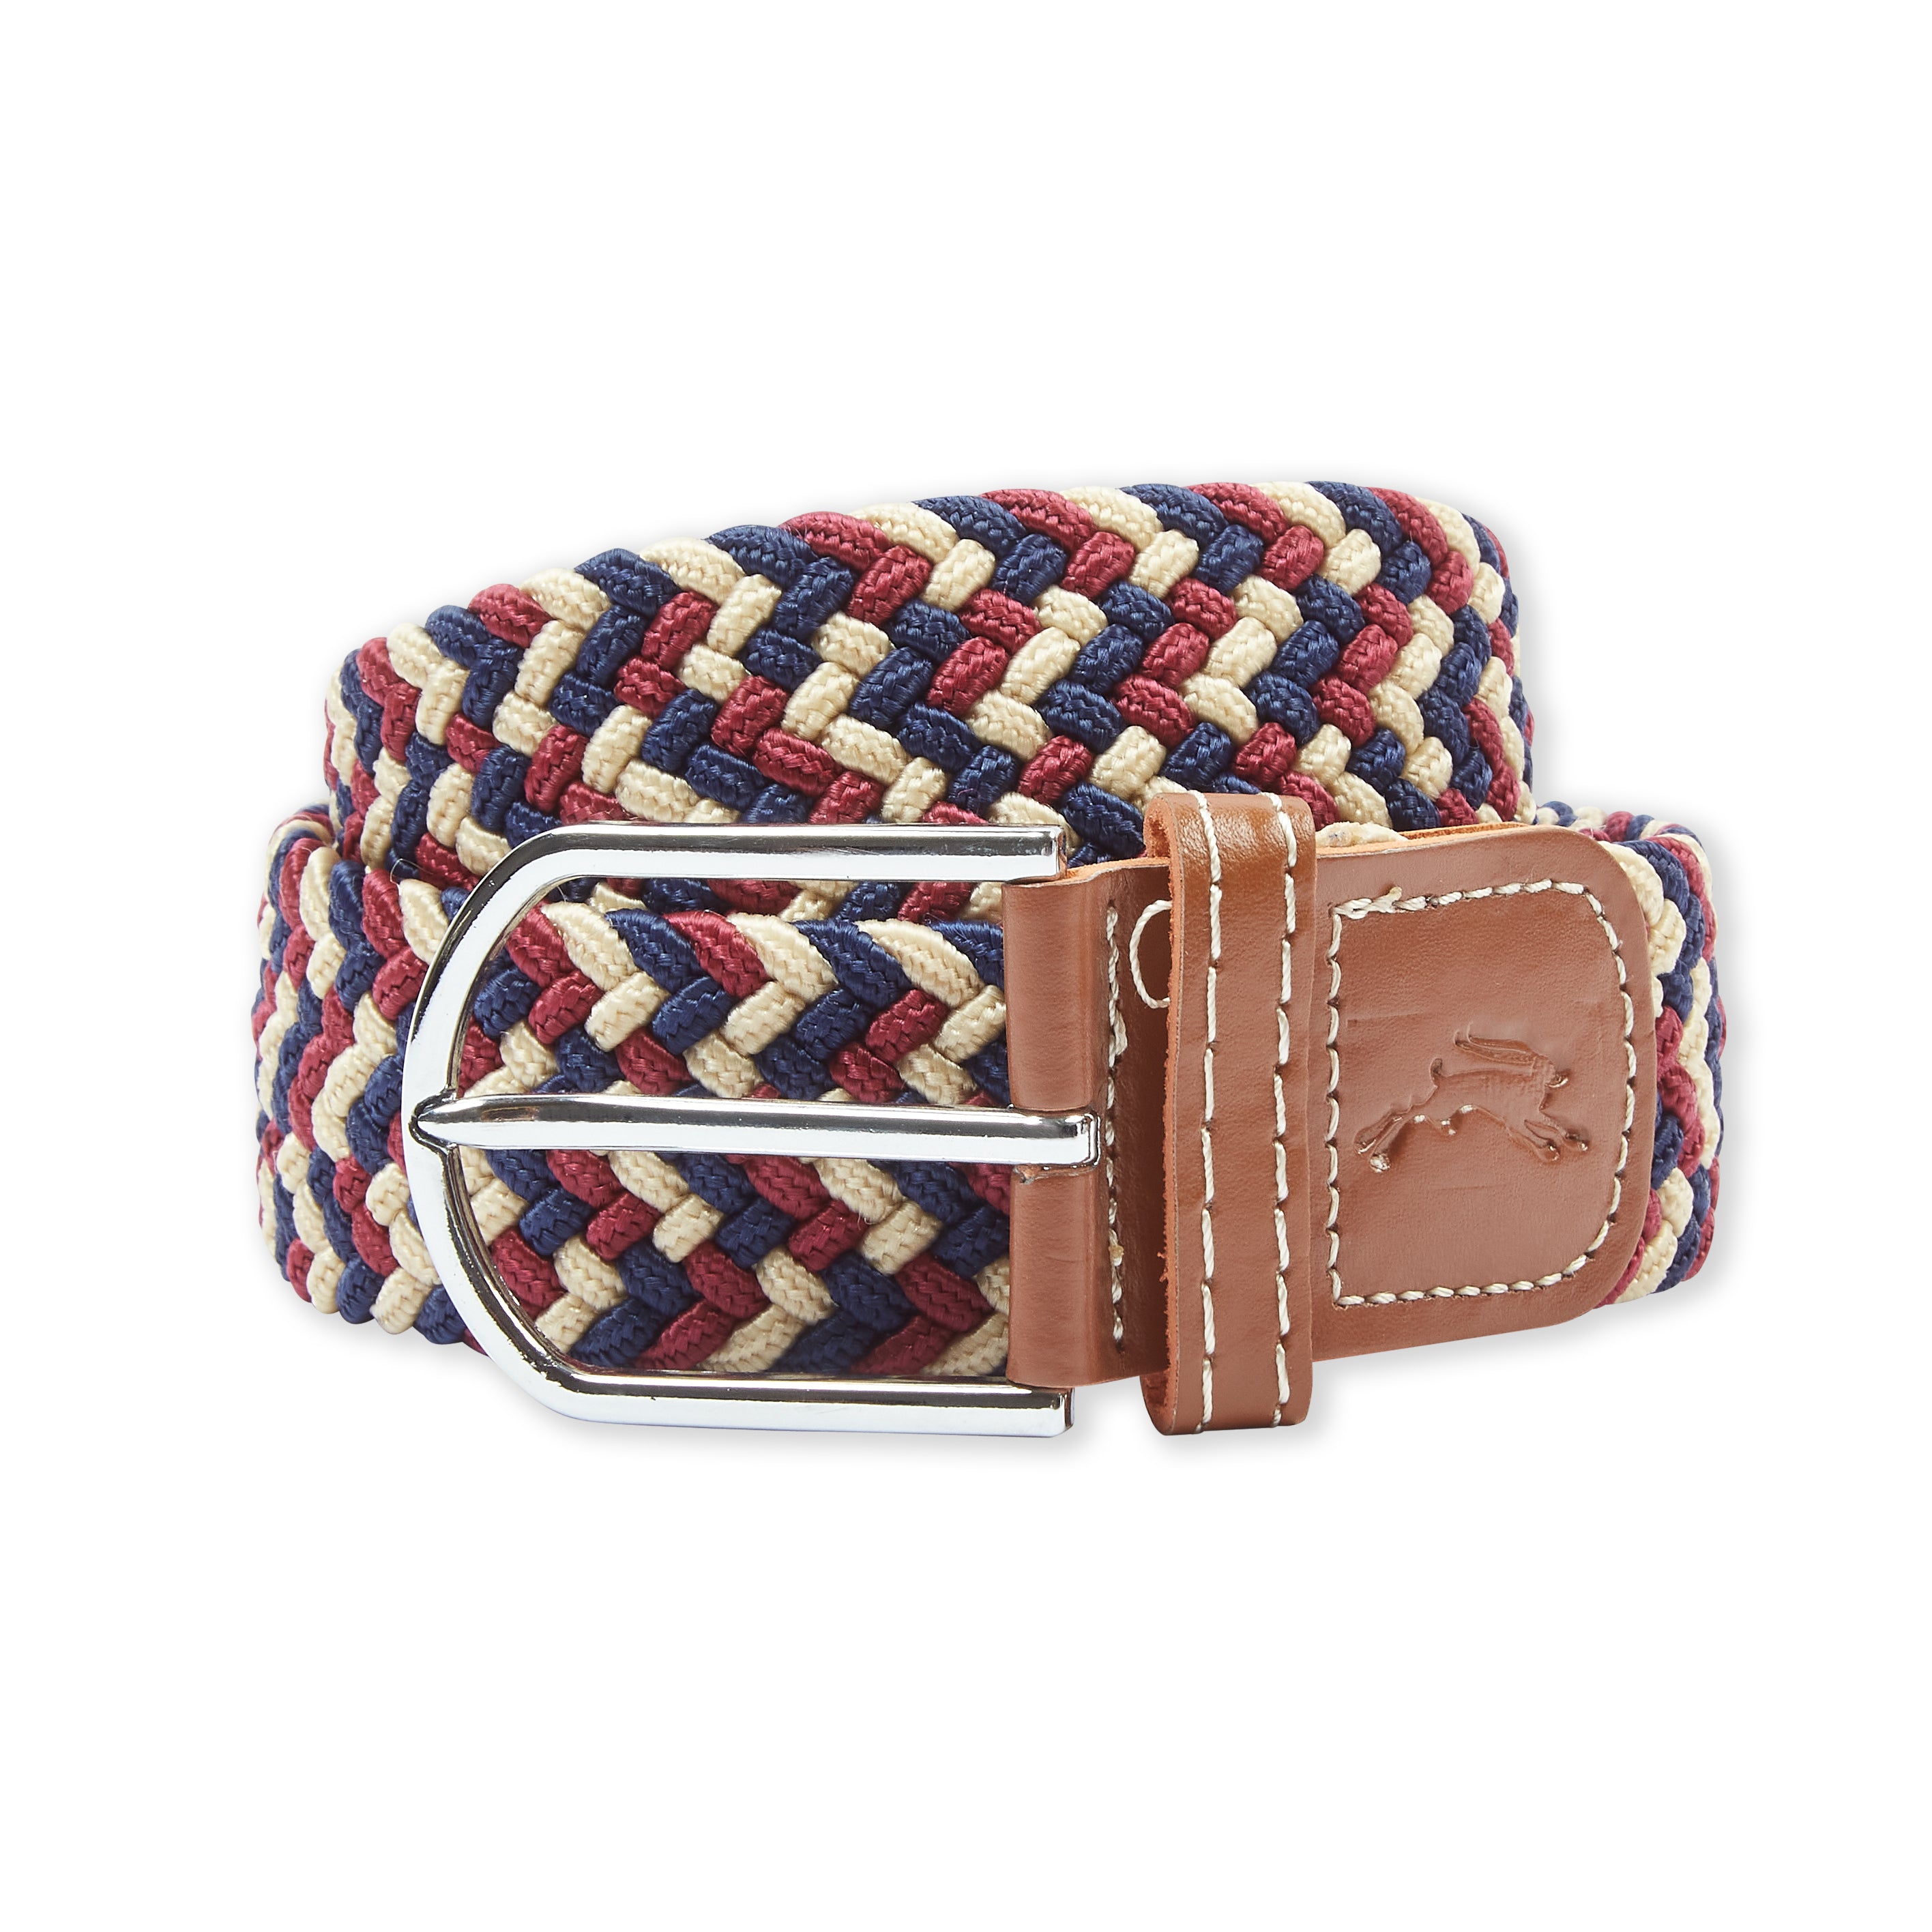 Burrows & Hare  One Size Woven Belt Red White Navy